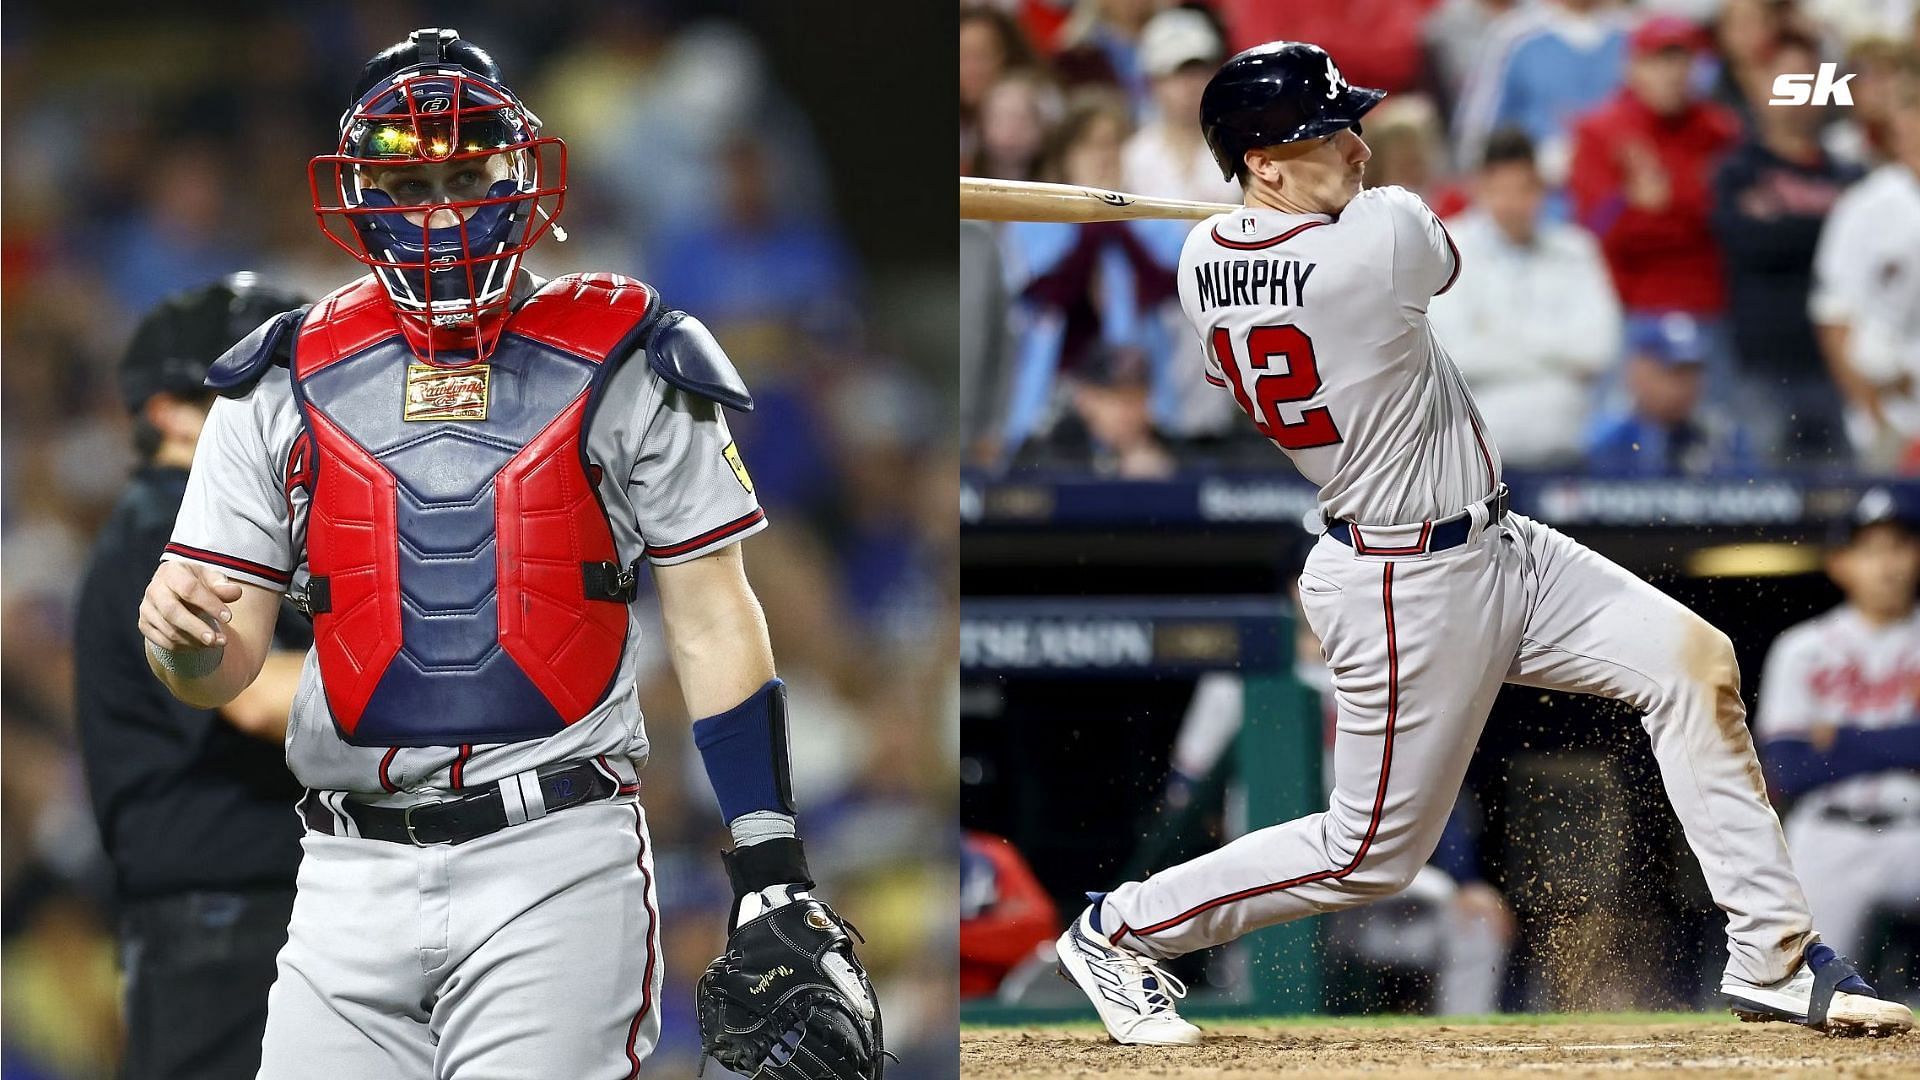 Braves News - Atlanta to place All-Star catcher Sean Murphy on IL after exiting season-opener with oblique injury